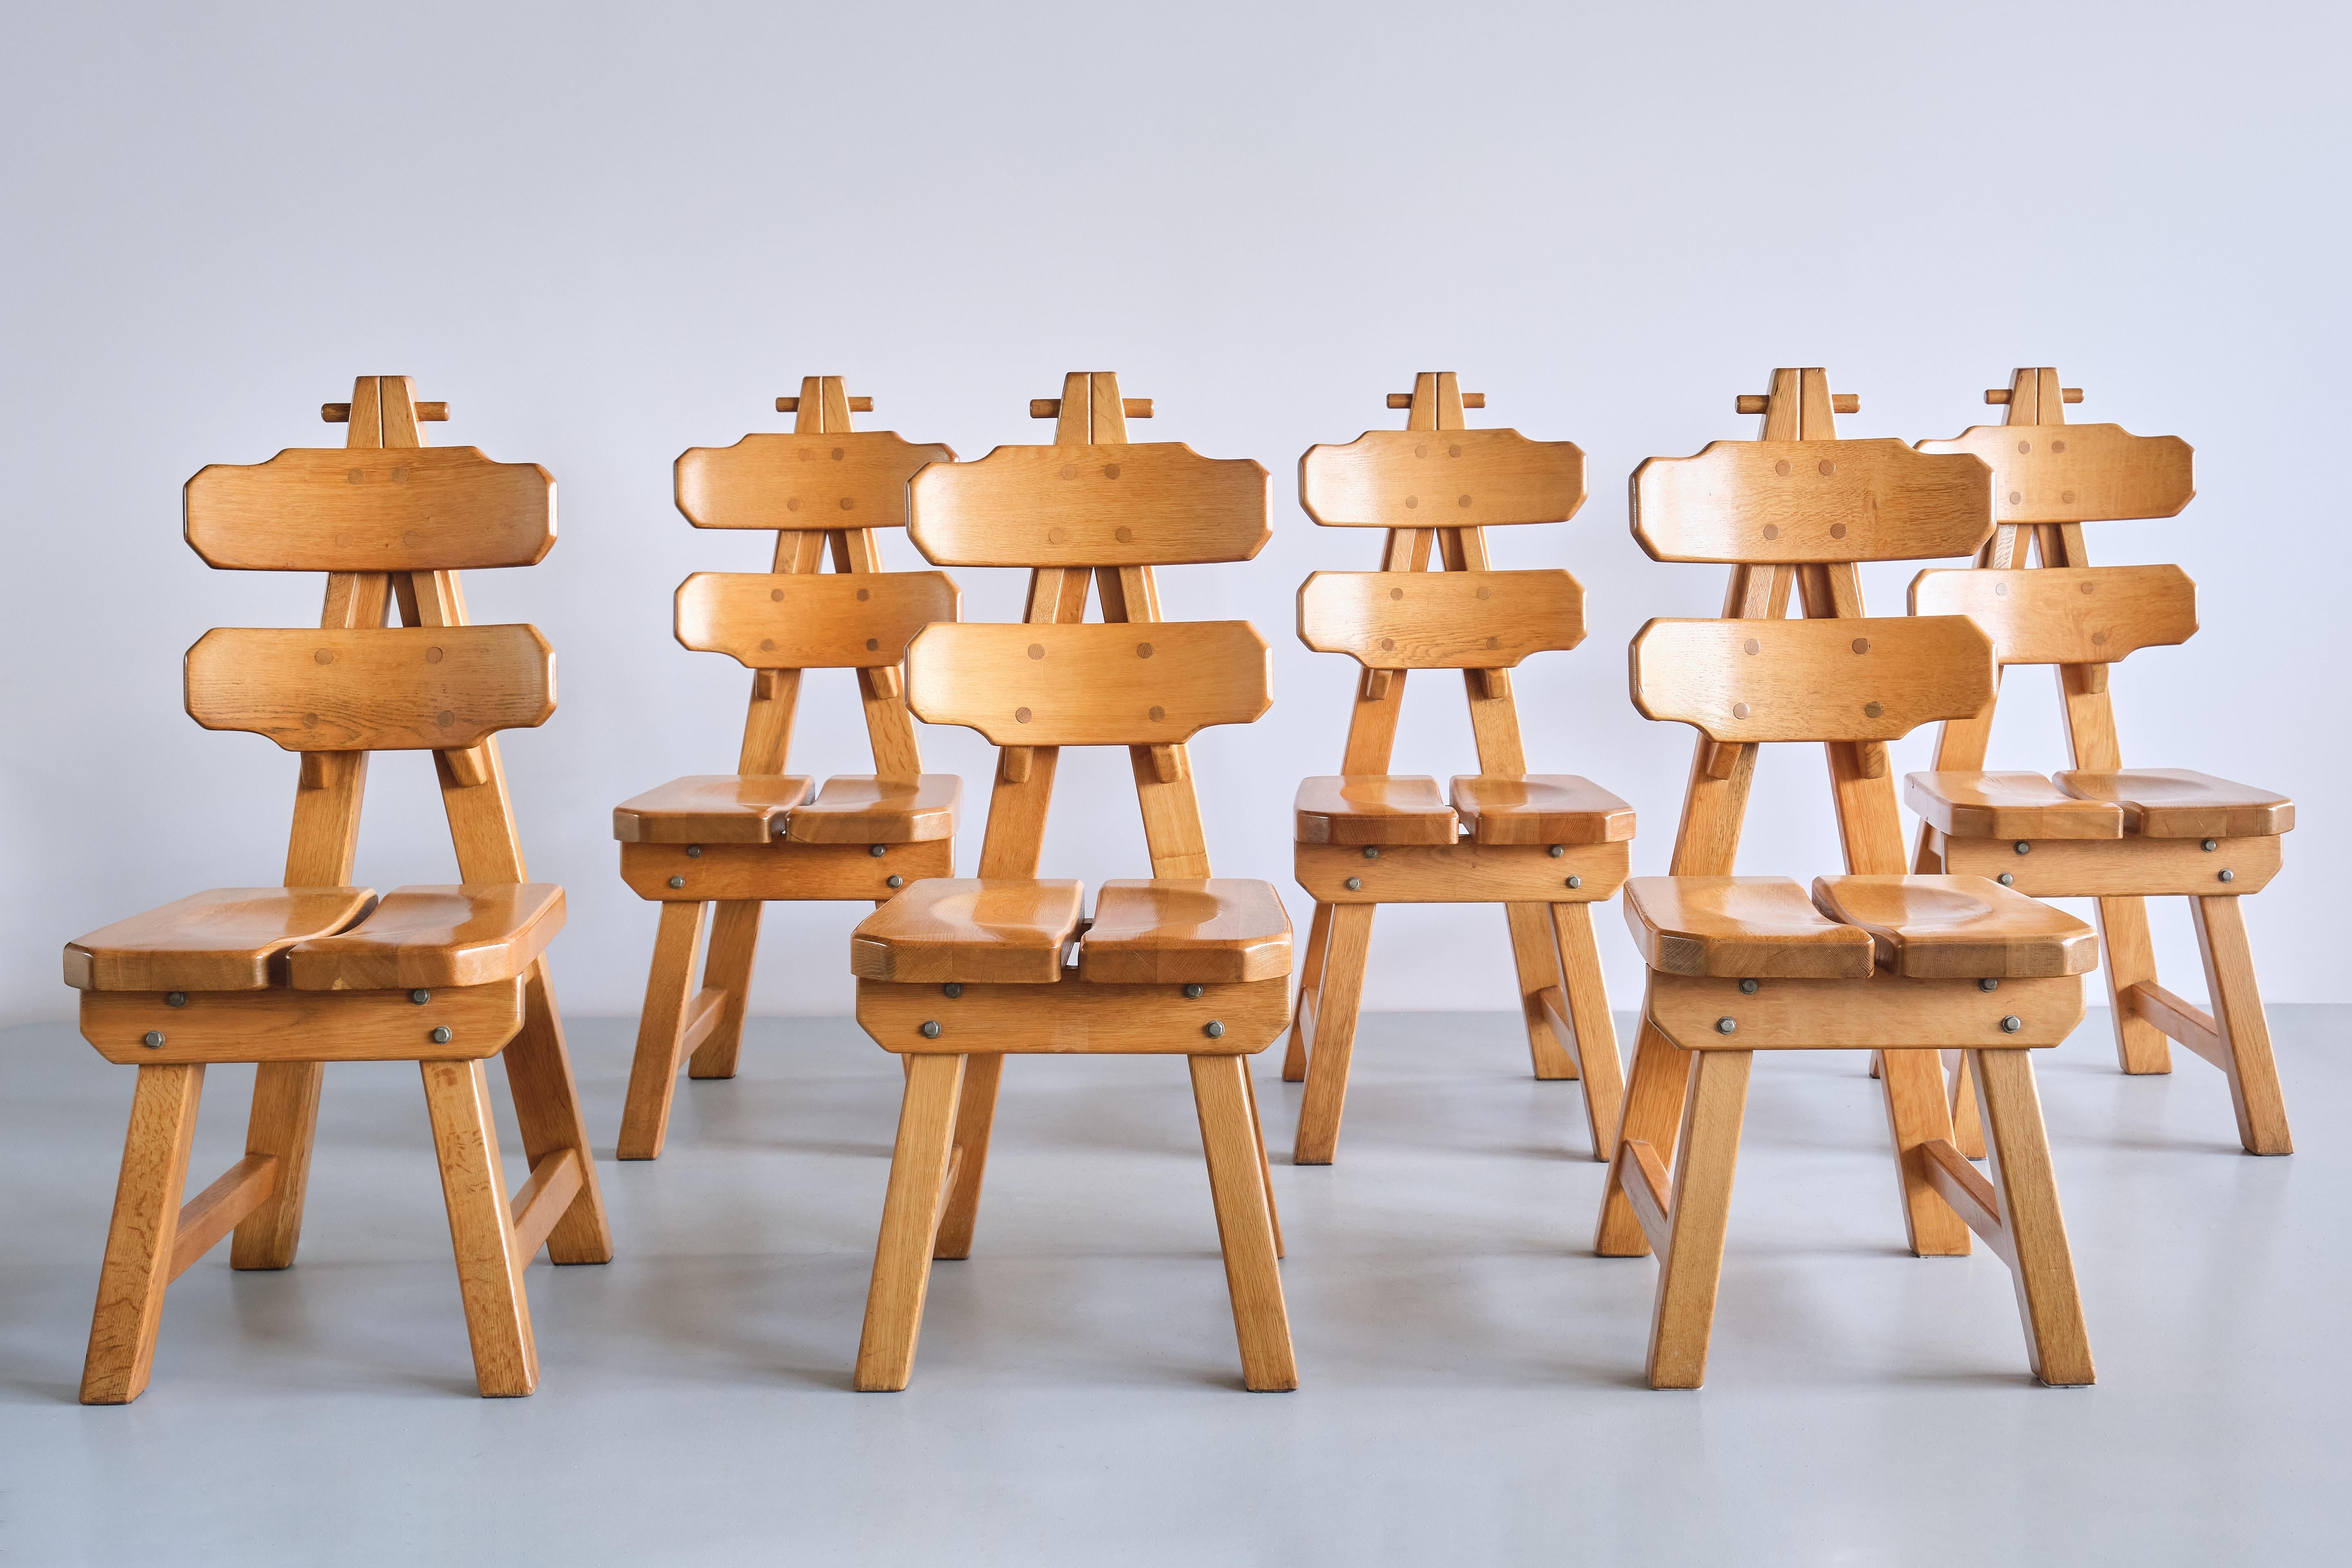 Sculptural Set of Six Brutalist Dining Chairs in Solid Oak, France, 1960s For Sale 11